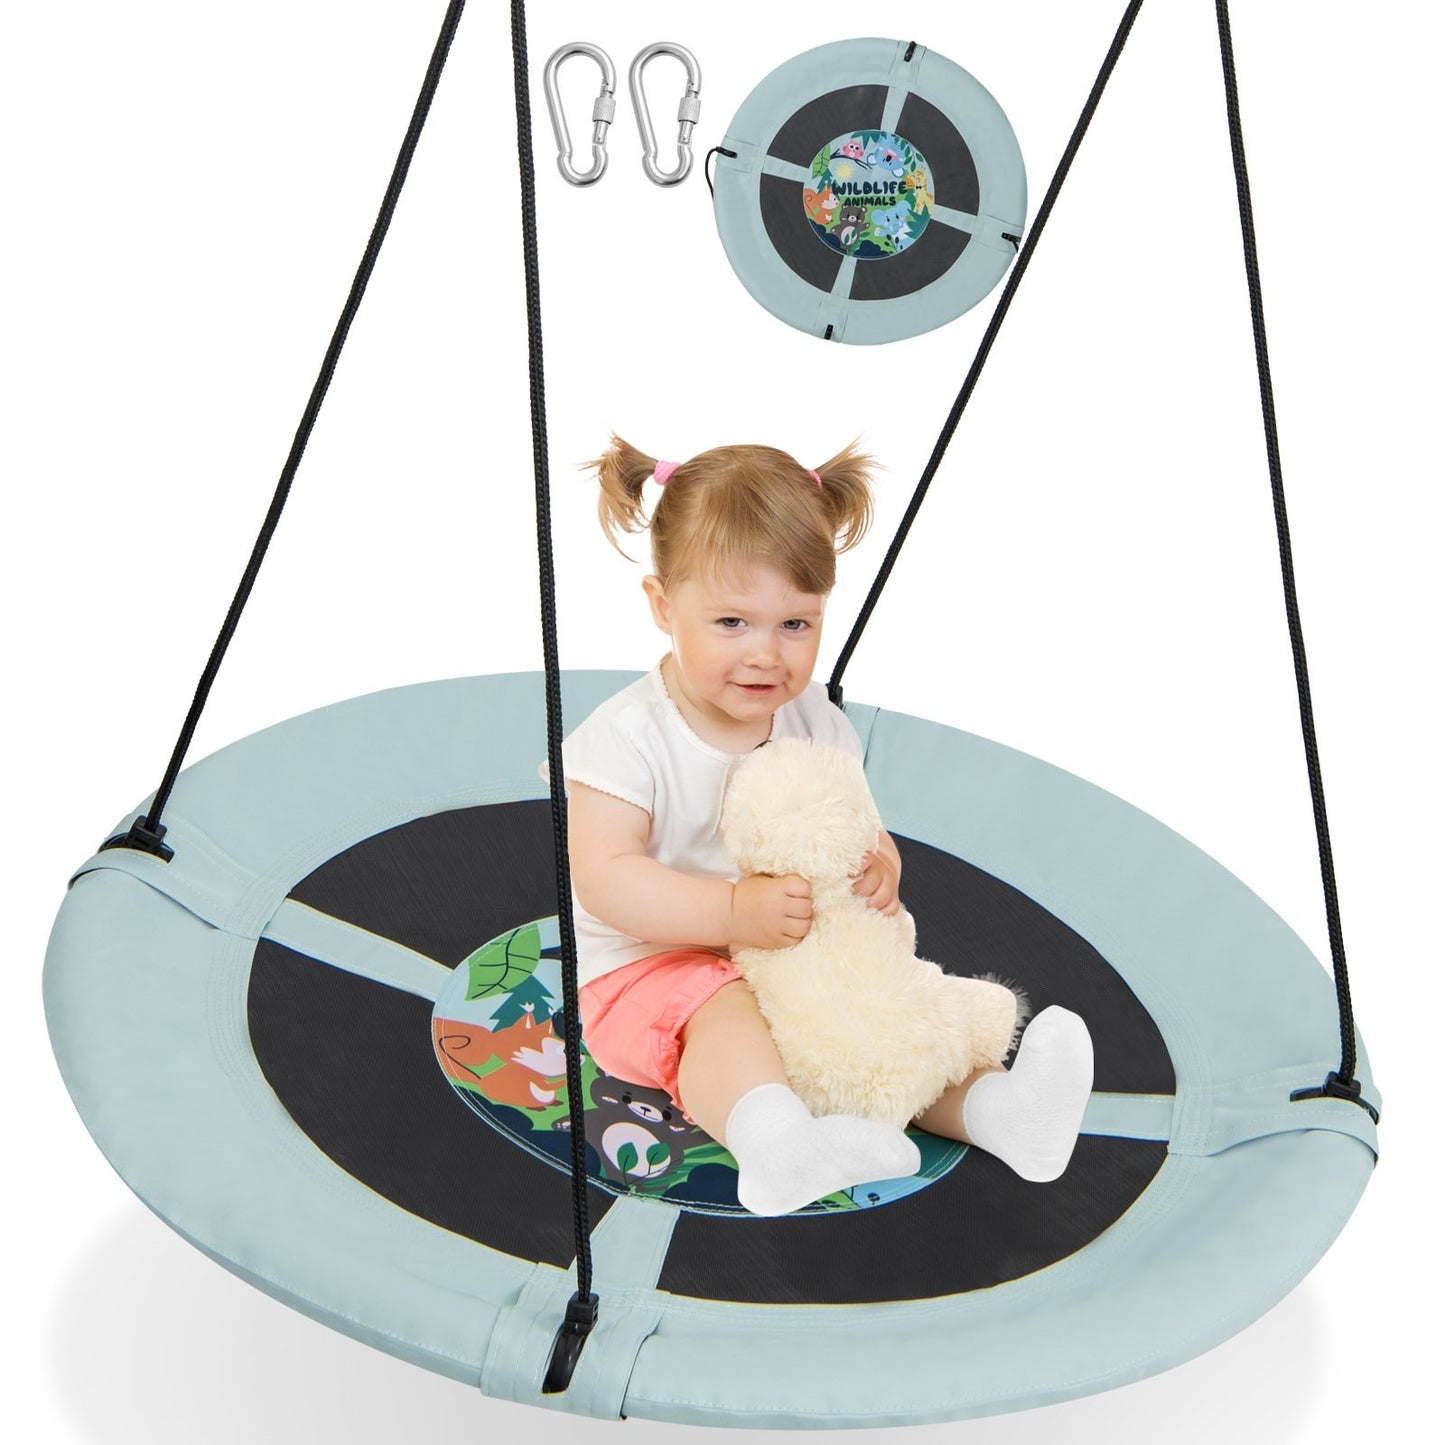 40 Inches Saucer Tree Swing with Adjustable Hanging Ropes and 900D Oxford Fabric-Forest